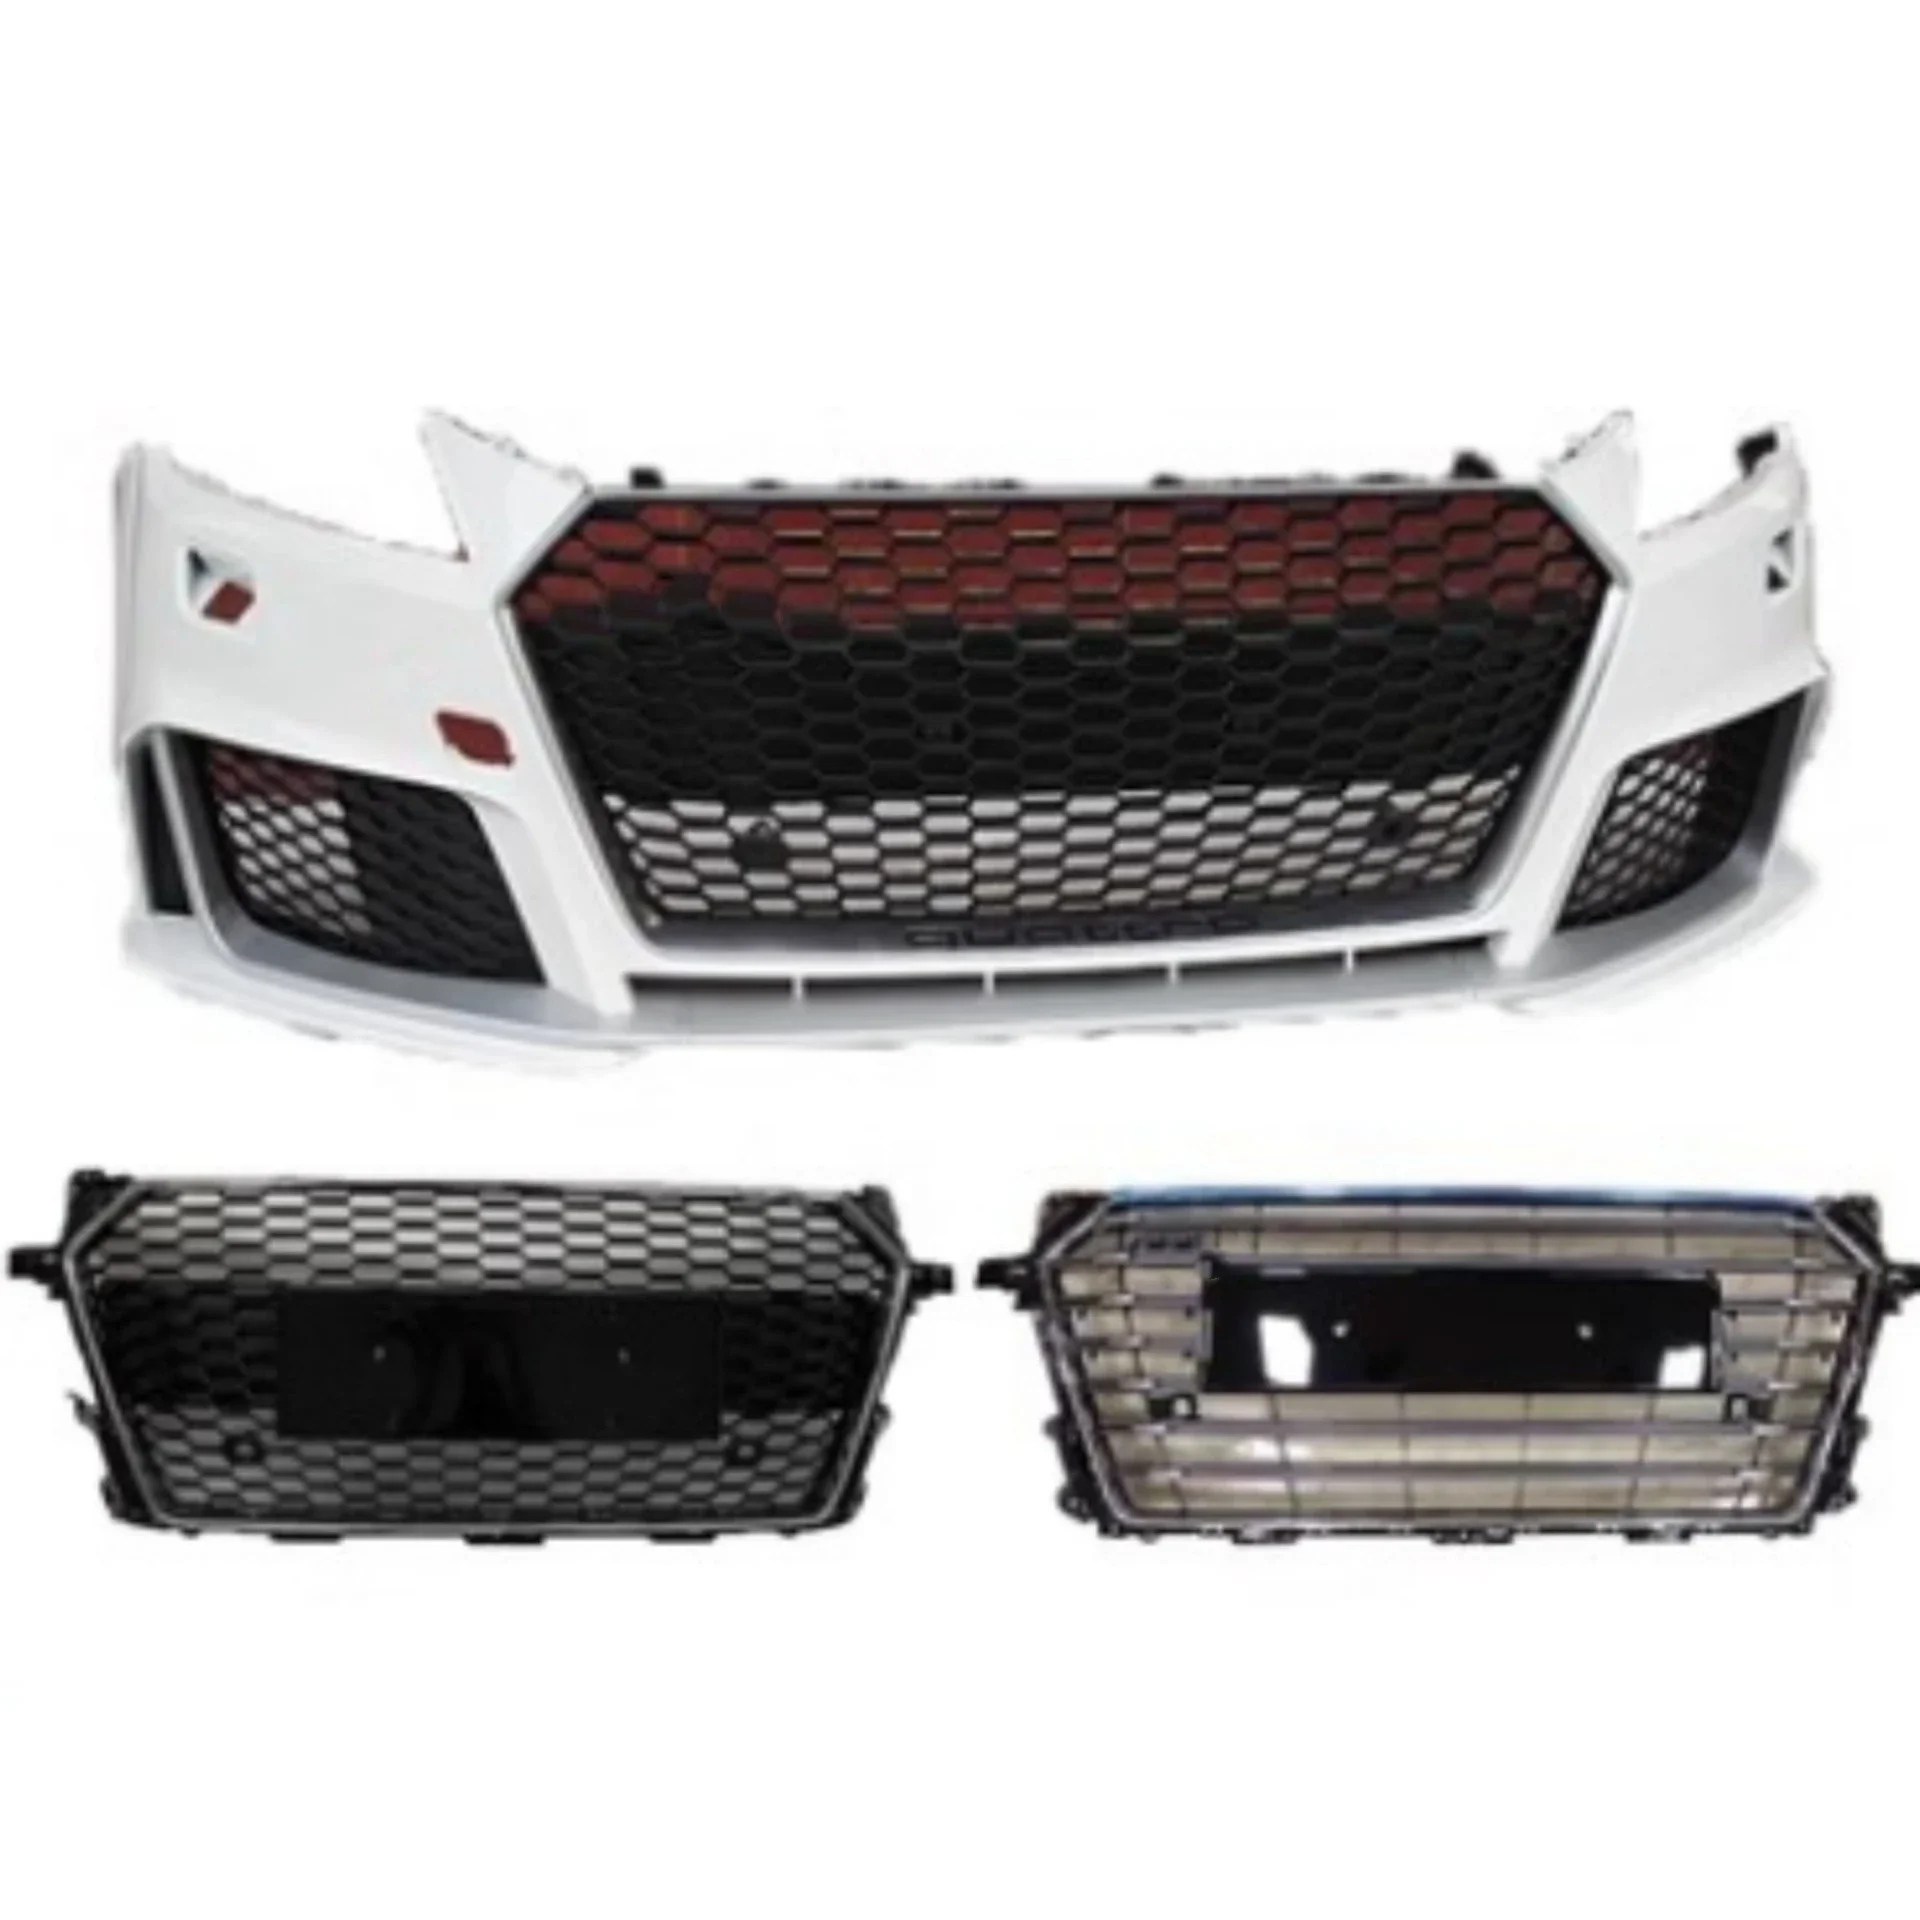 

Front Bumper Assembly Grille Rear Lip Tail Throat for Audi TT 2016-2019 Convert TTRS Body Kit Surround Car Accessories